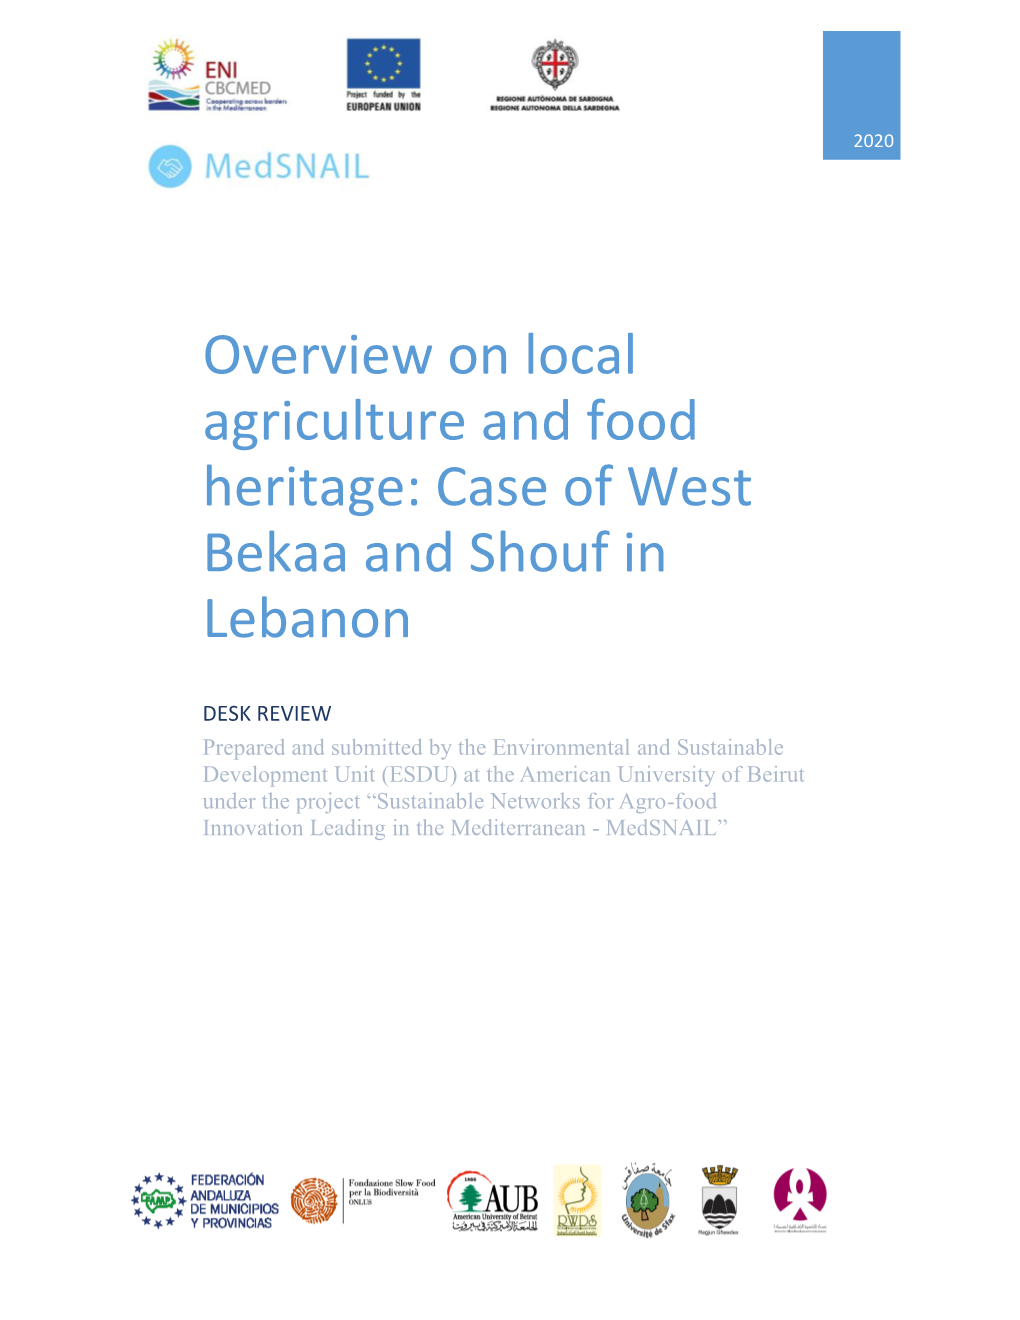 Overview on Local Agriculture and Food Heritage: Case of West Bekaa and Shouf in Lebanon